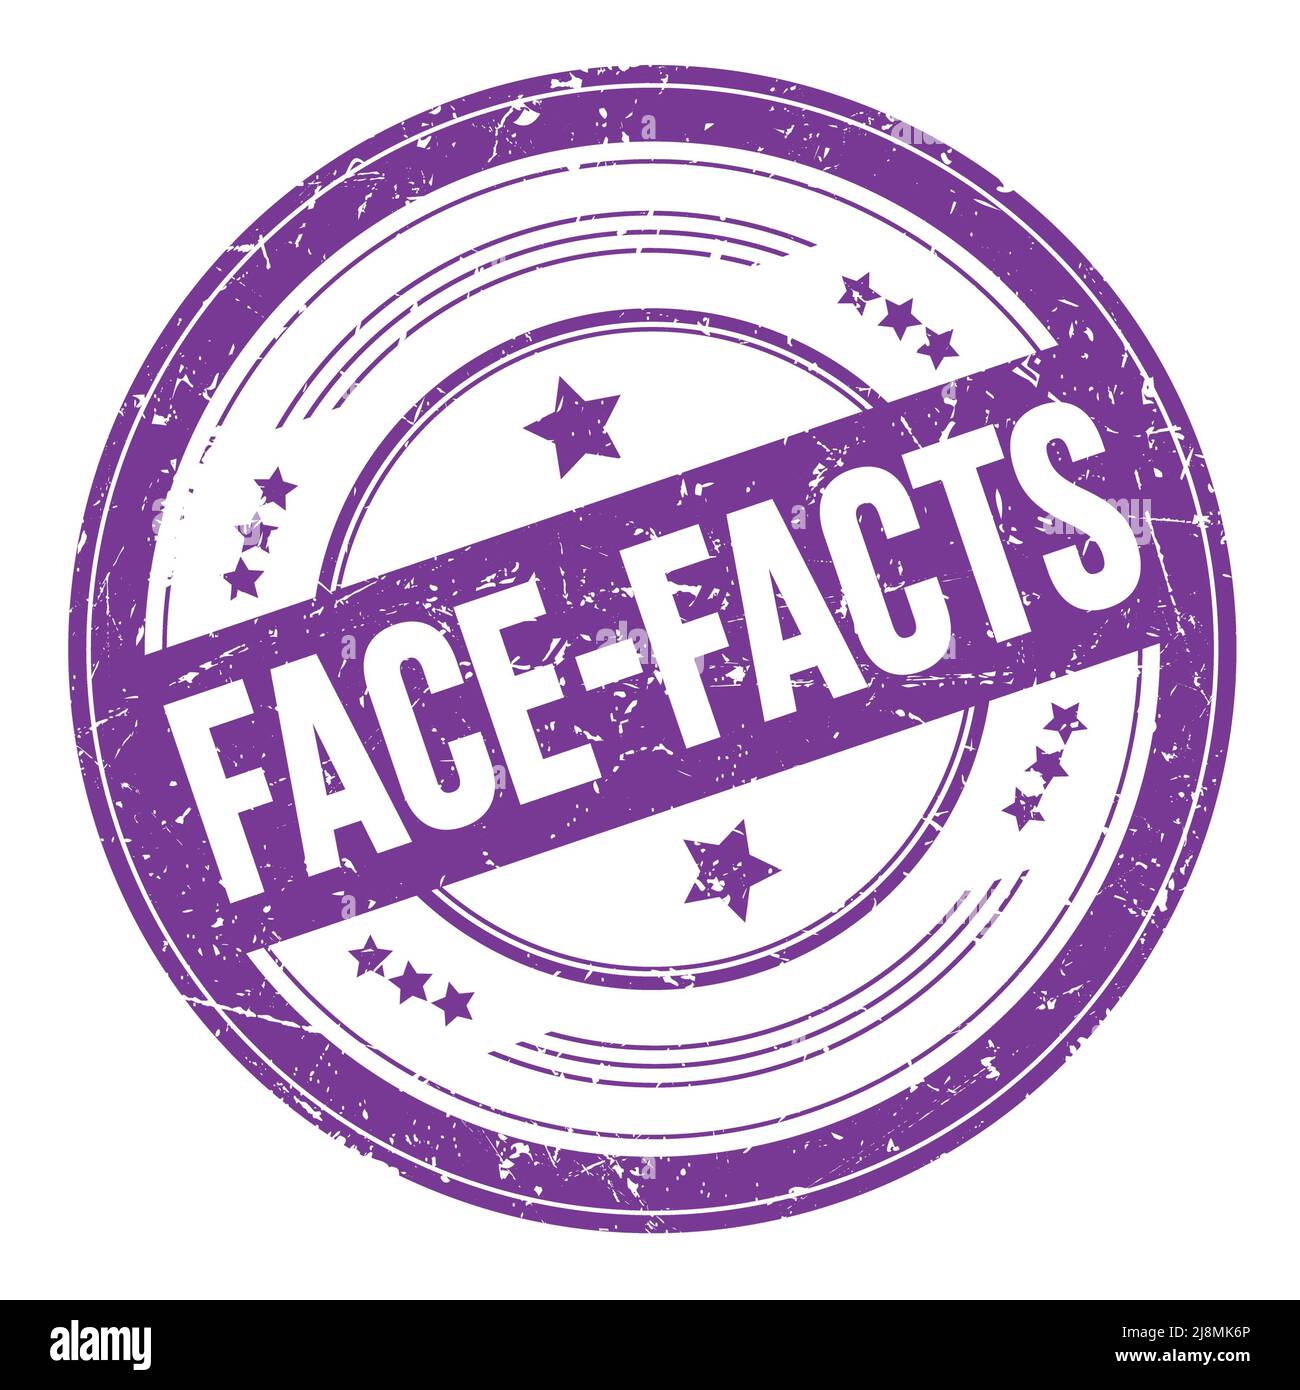 FACE-FACTS text on violet indigo round grungy texture stamp. Stock Photo